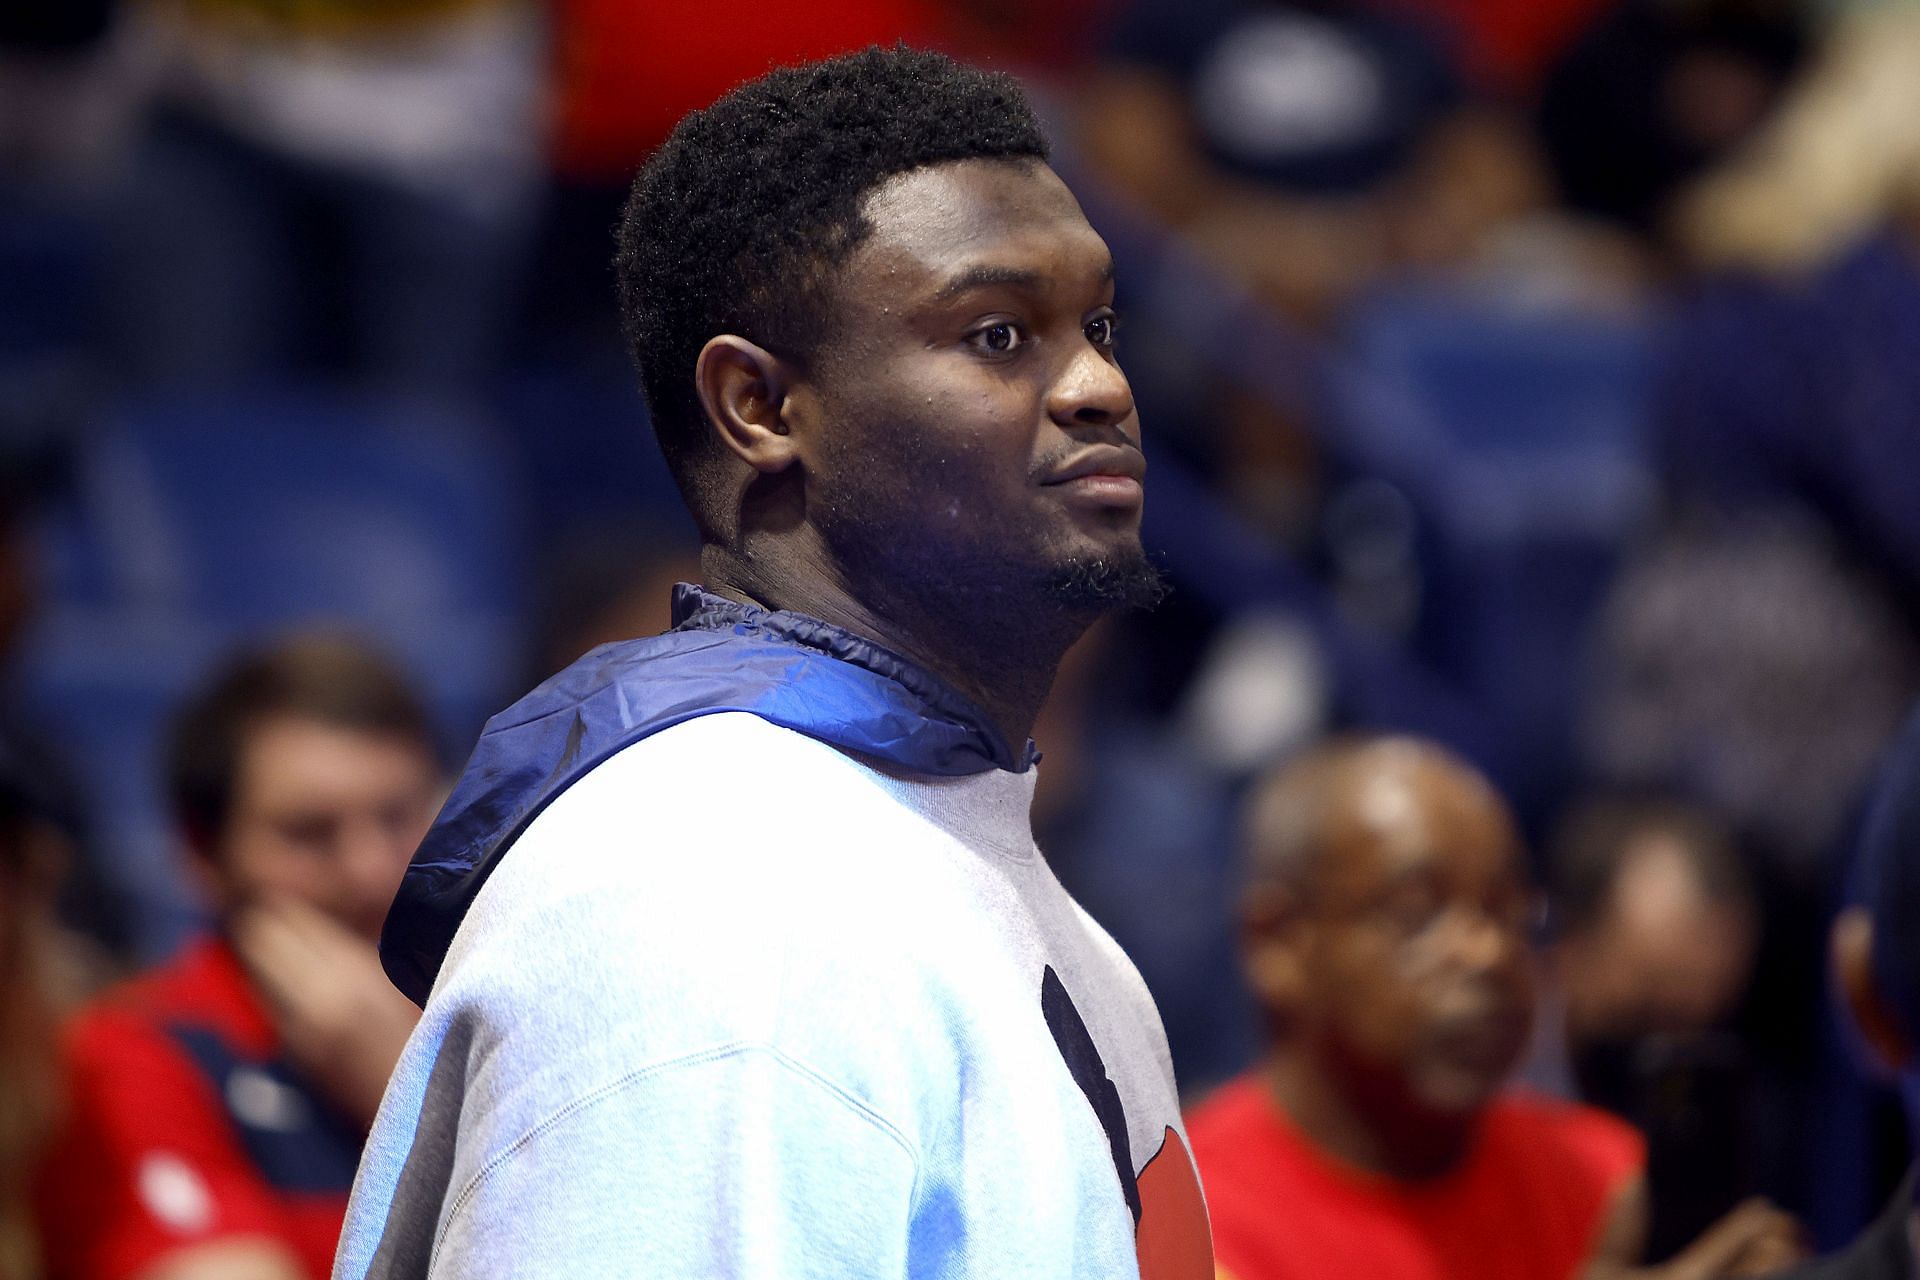 Zion Williamson of the New Orleans Pelicans. Williamson sat out the entire 2021-22 season with multiple injuries.